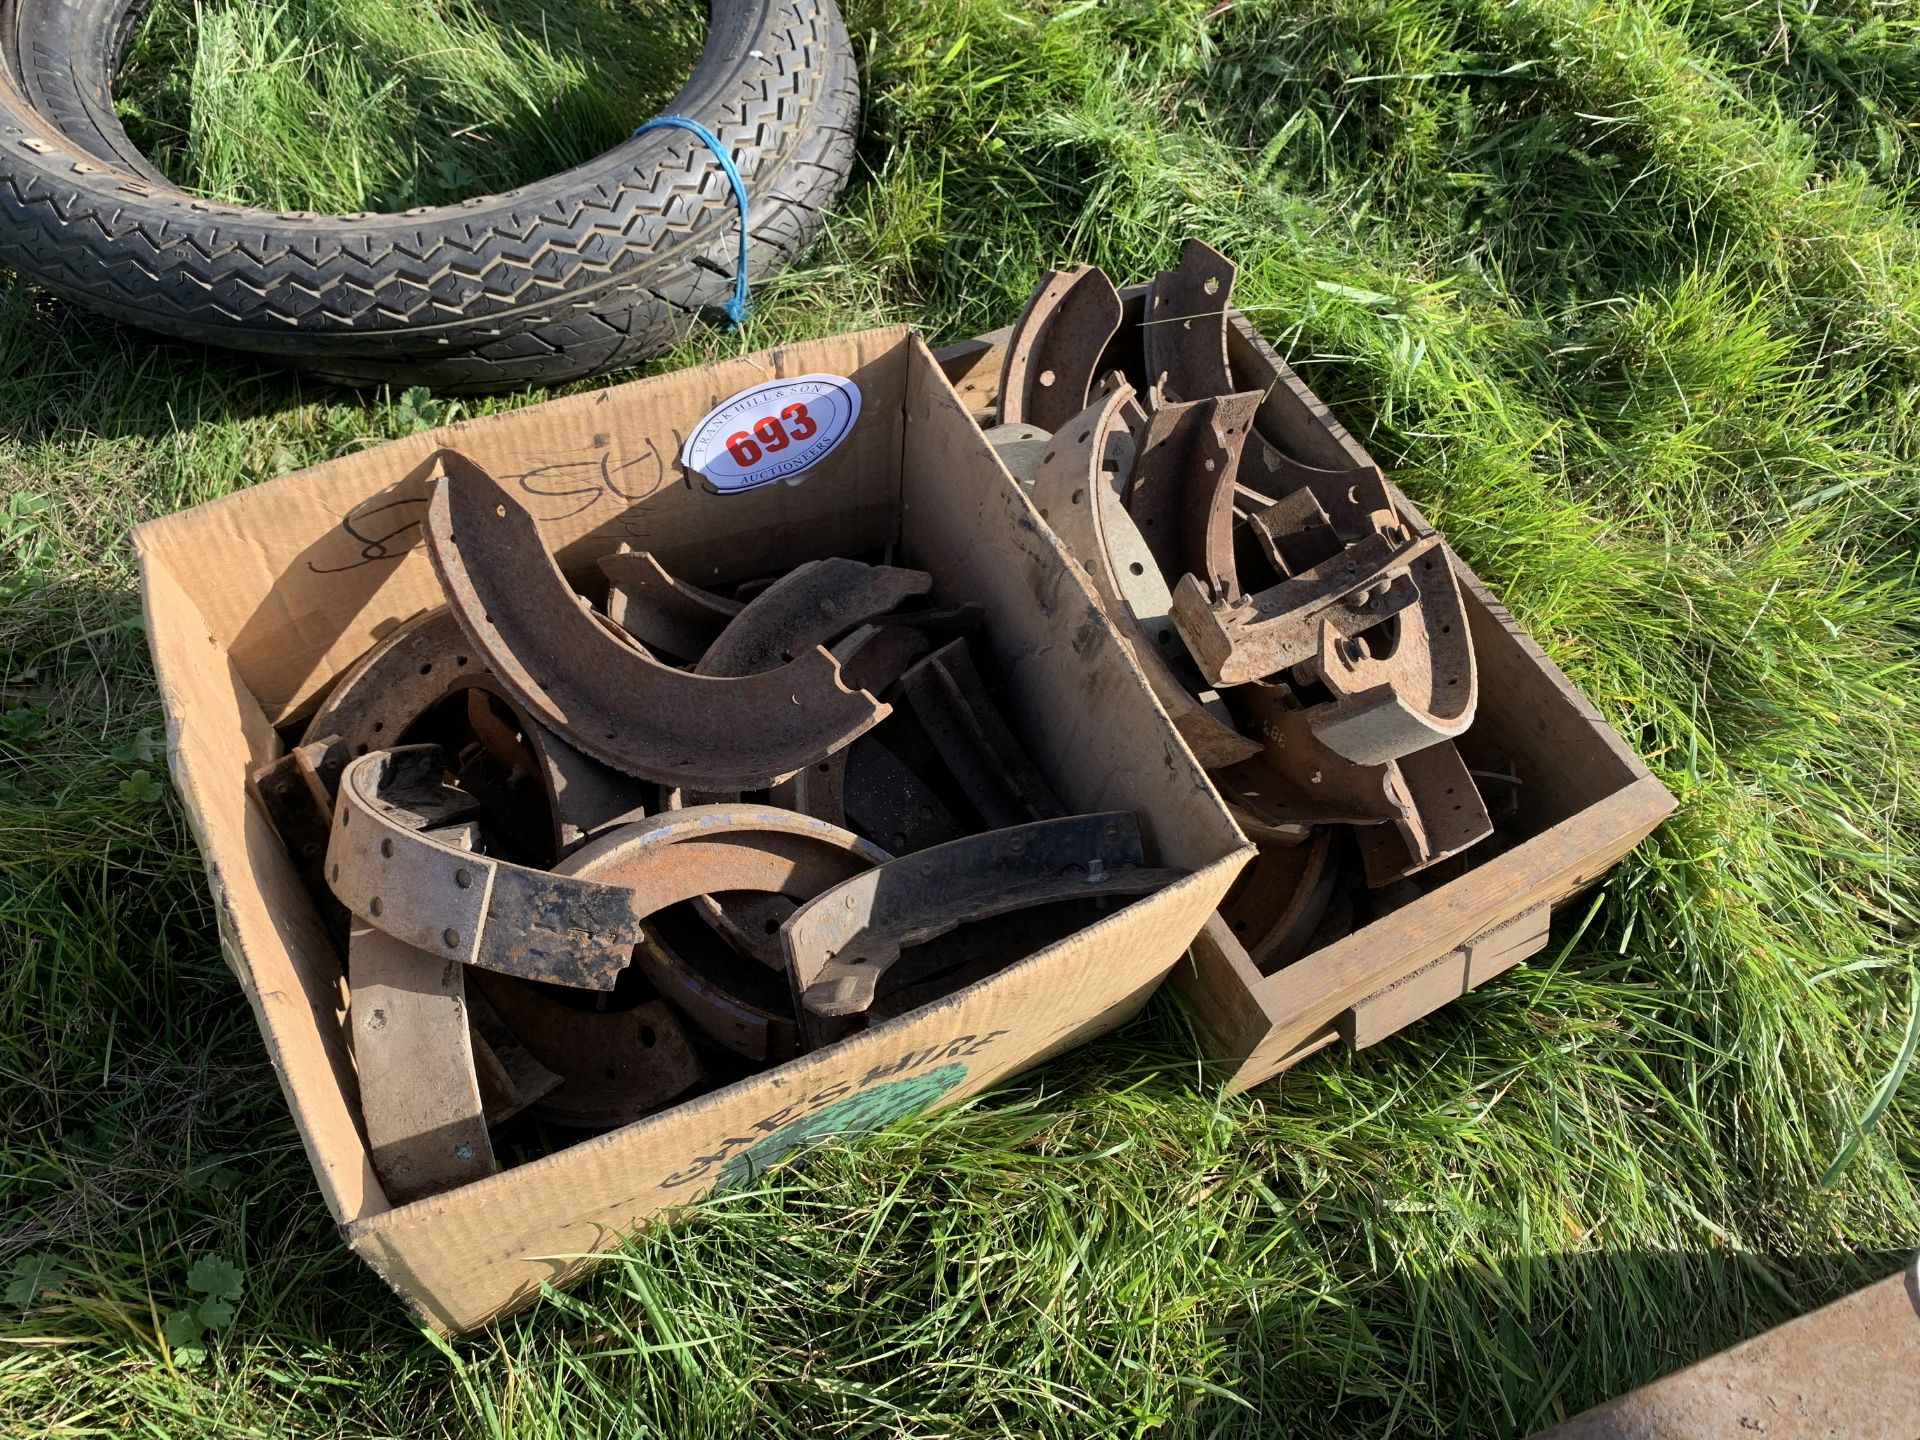 2 boxes of brake shoes